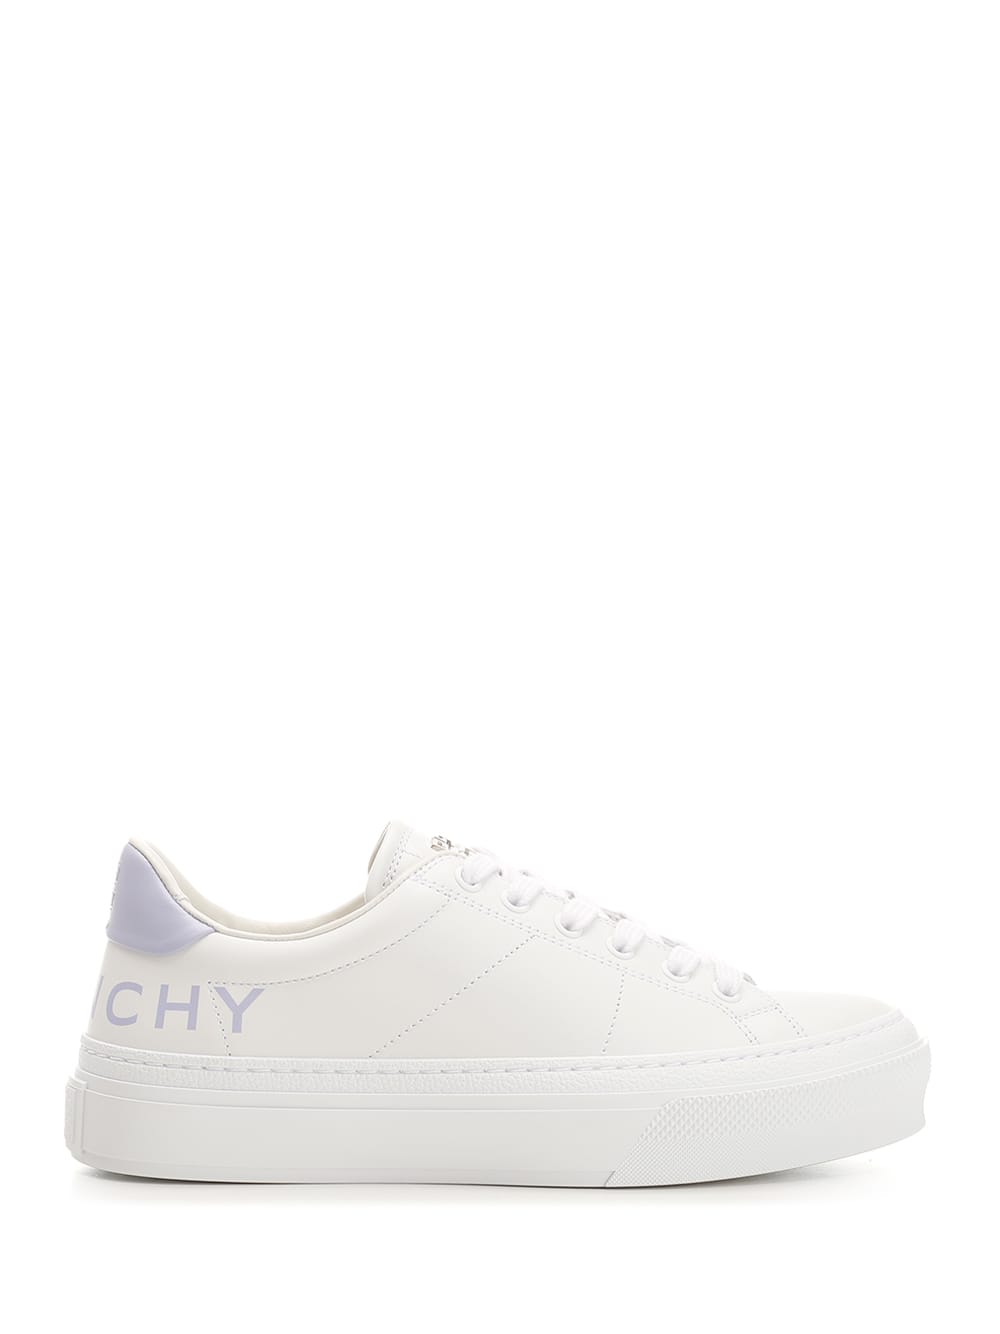 GIVENCHY CITY SNEAKER